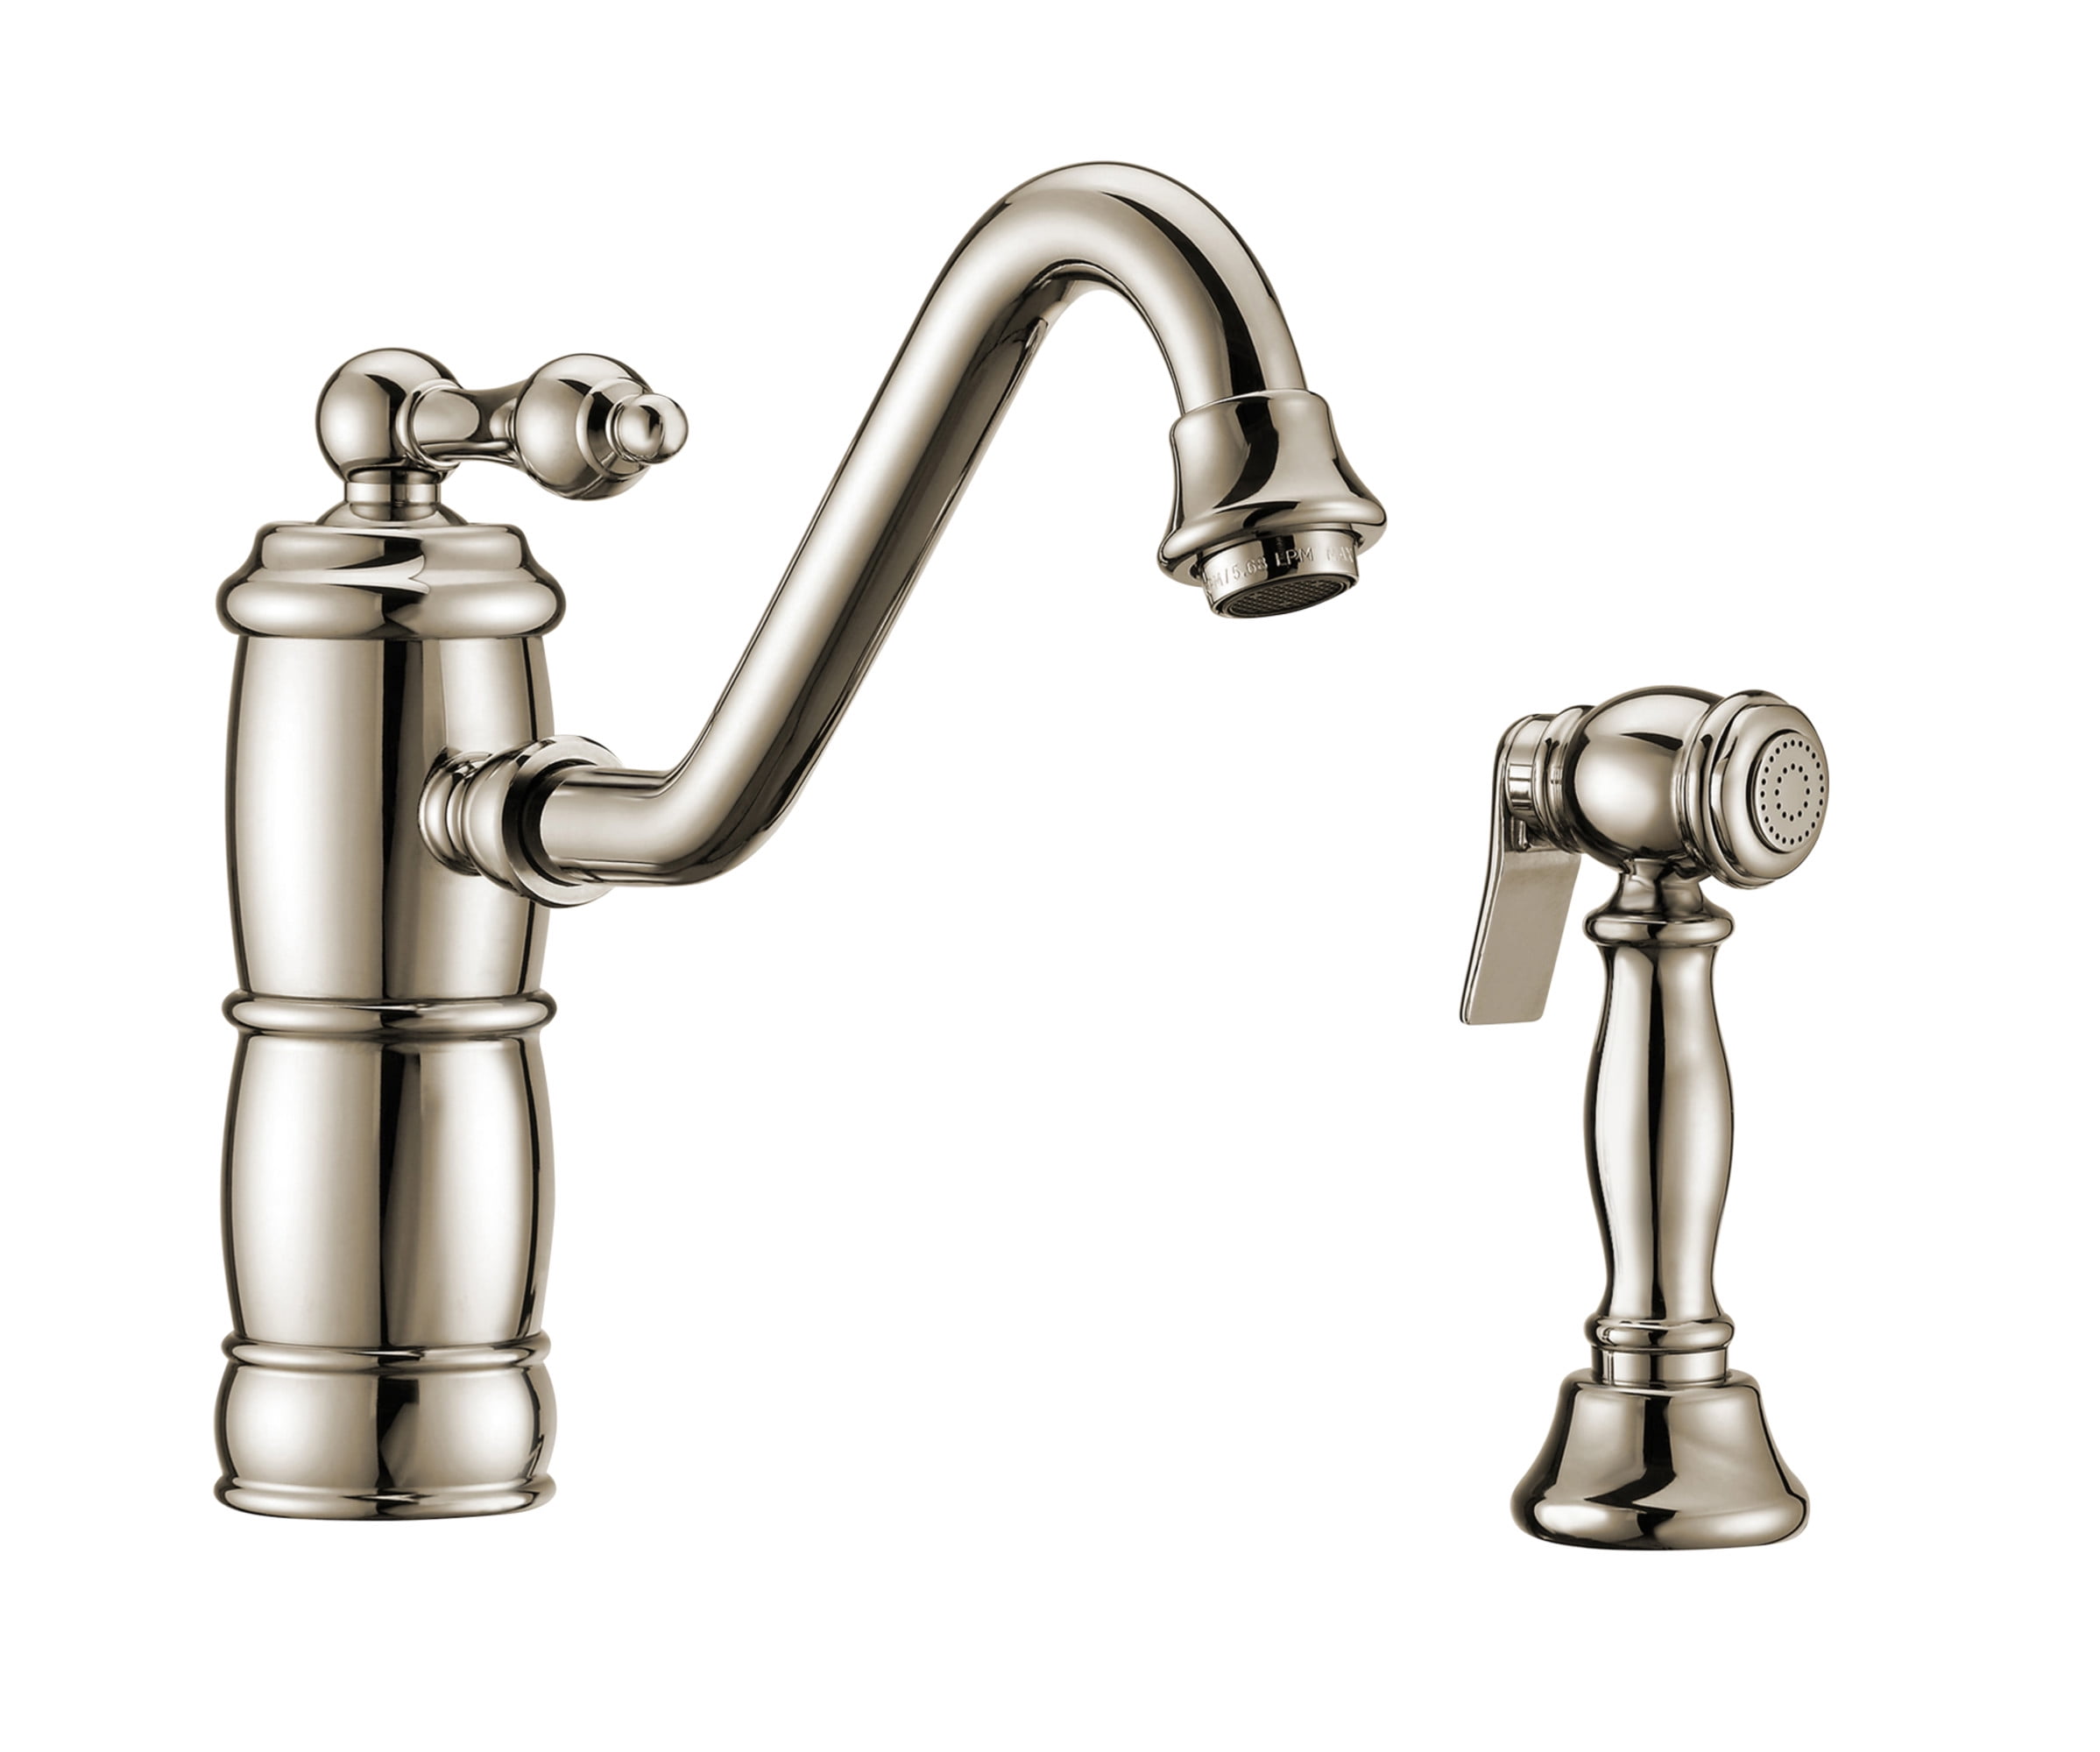 Whktsl3-2200-nt-pn Vintage Iii Plus Single-lever Faucet With A Traditional Swivel Spout - Polished Nickel